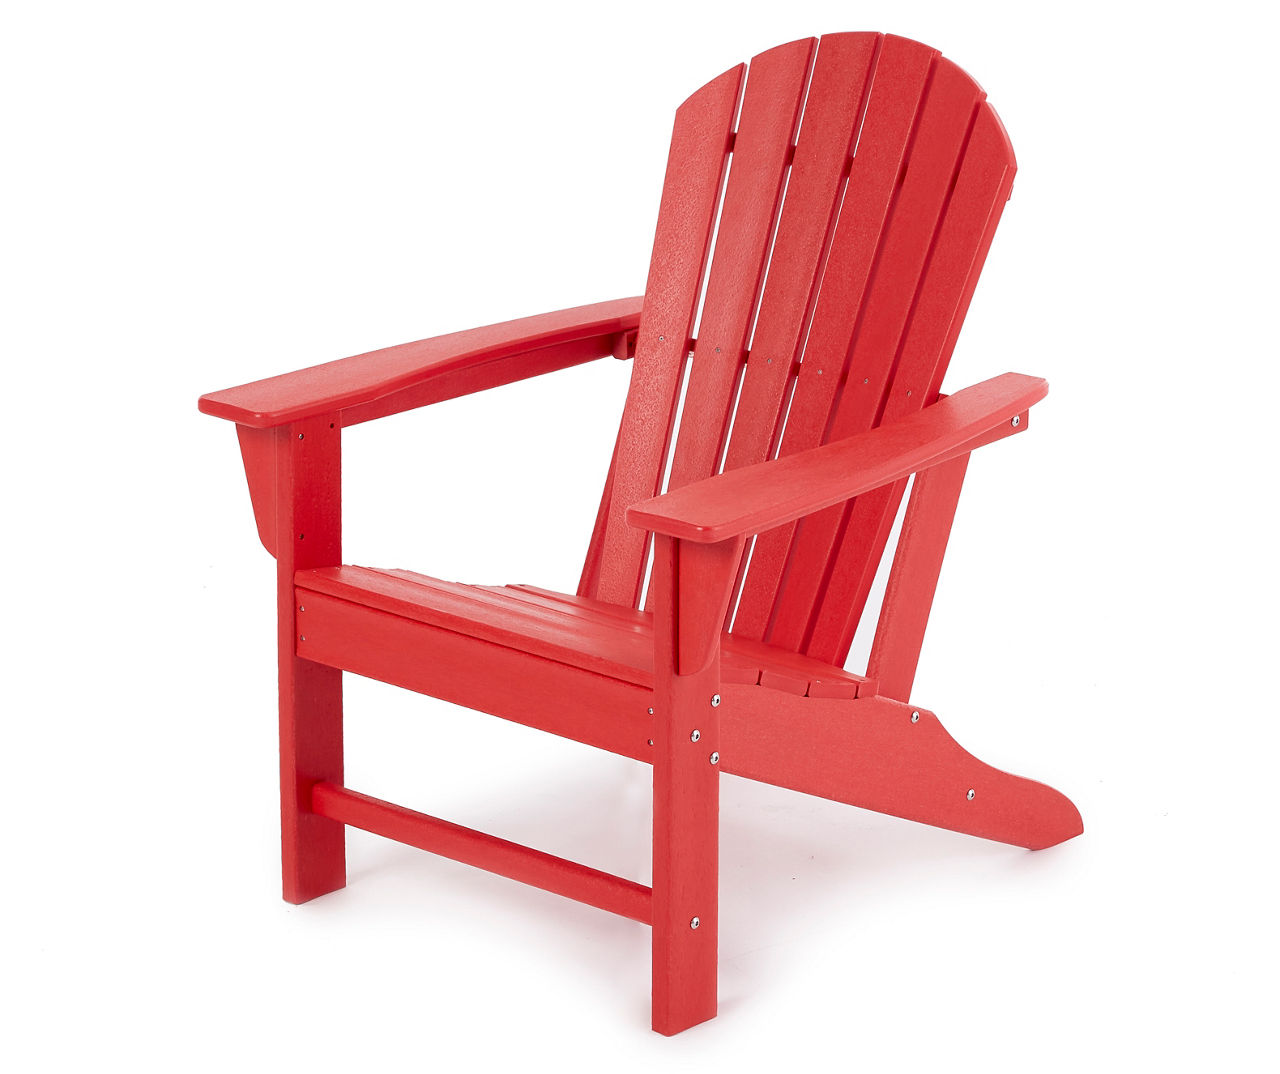 Red Adirondack Wood-Look Outdoor Chair